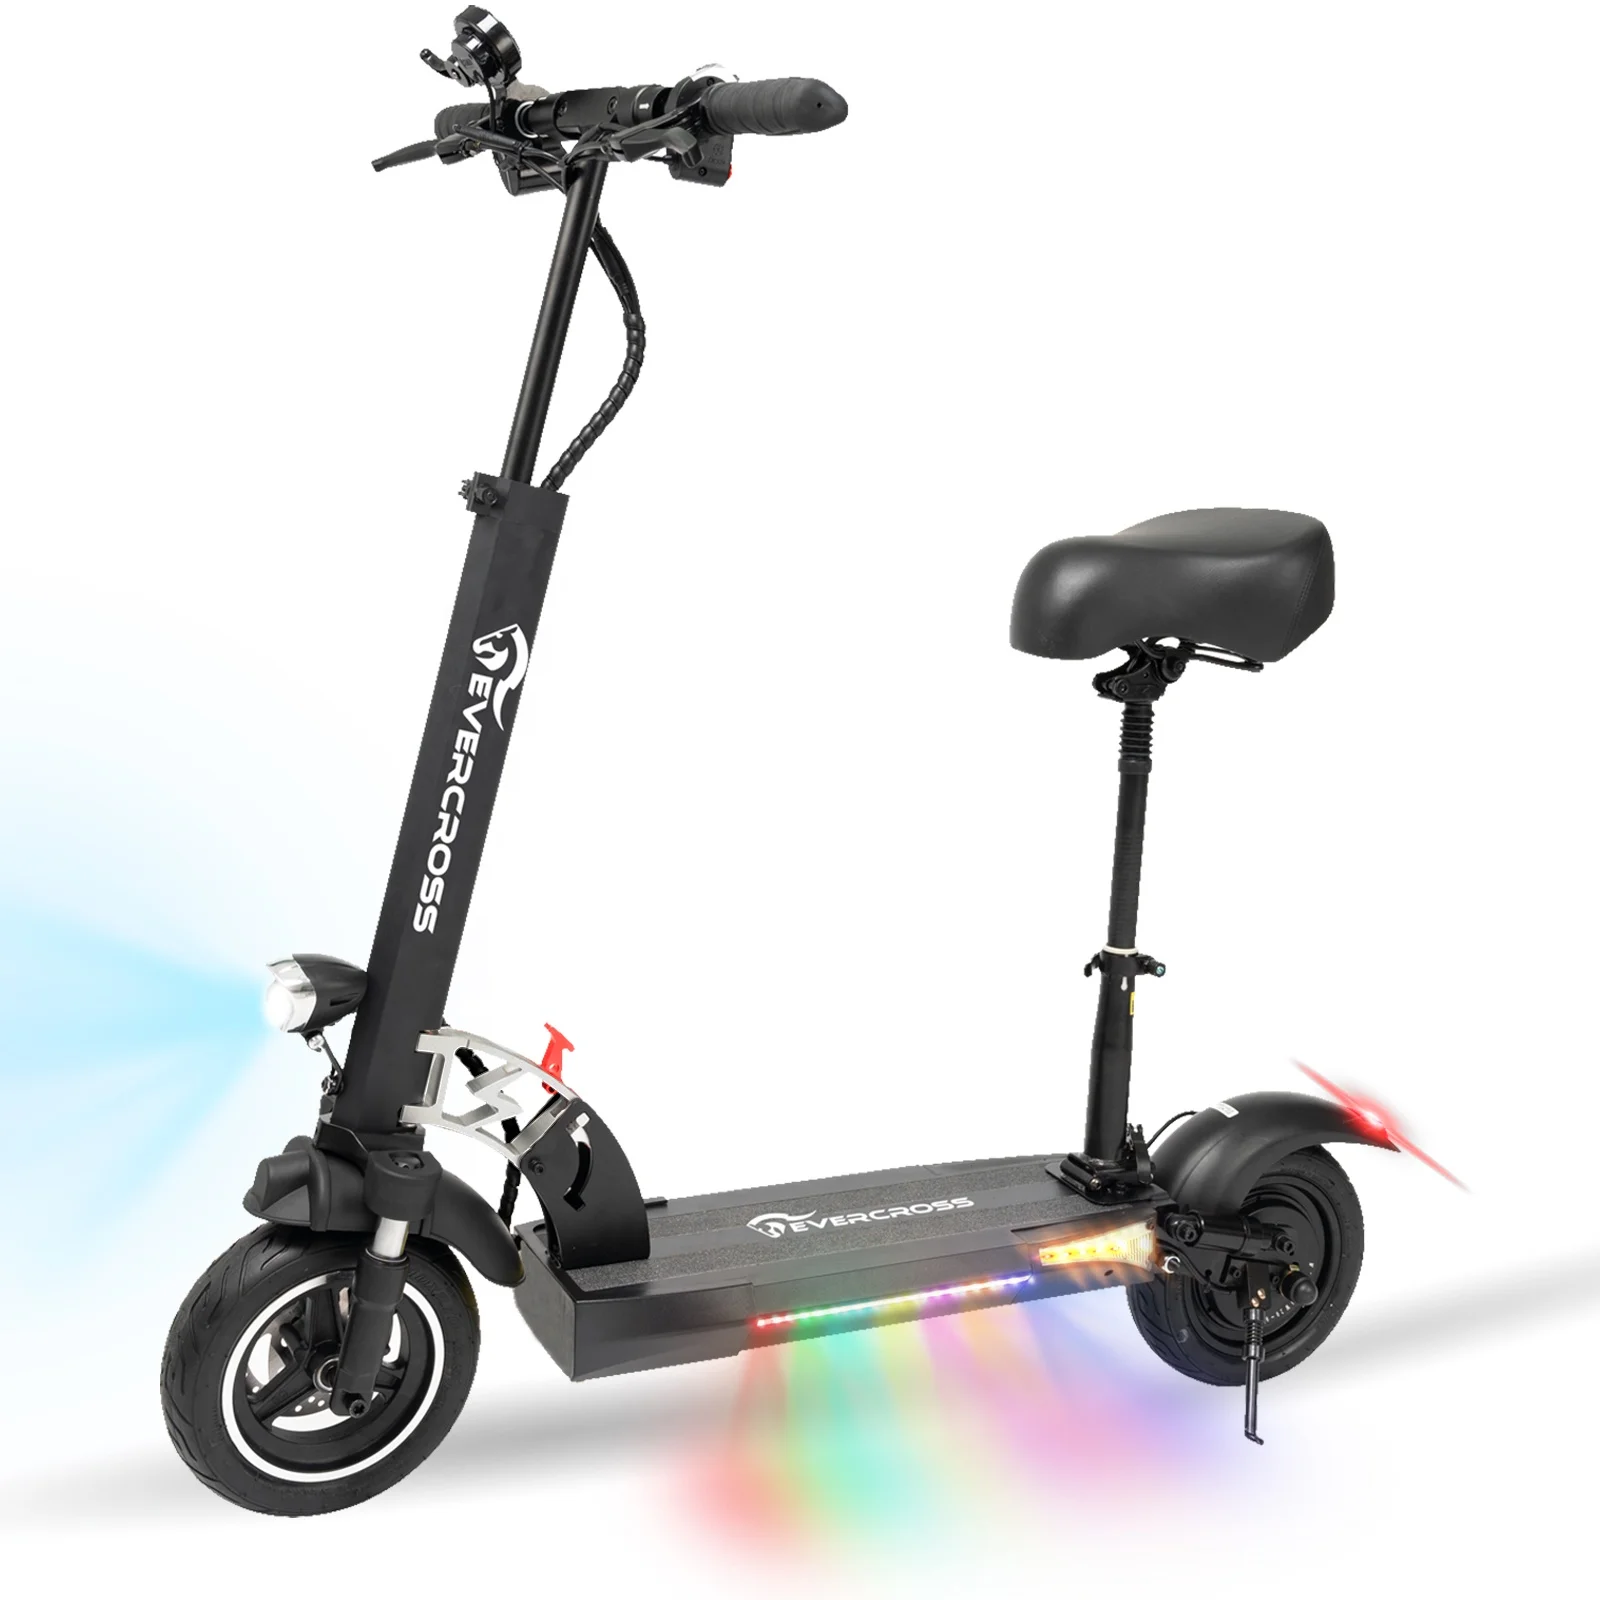 

EU warehouse fast shipping 45km/h,10Ah big capacity 800W foldable HITWAY 10inch solid tyre E-scooter with seat for daily use